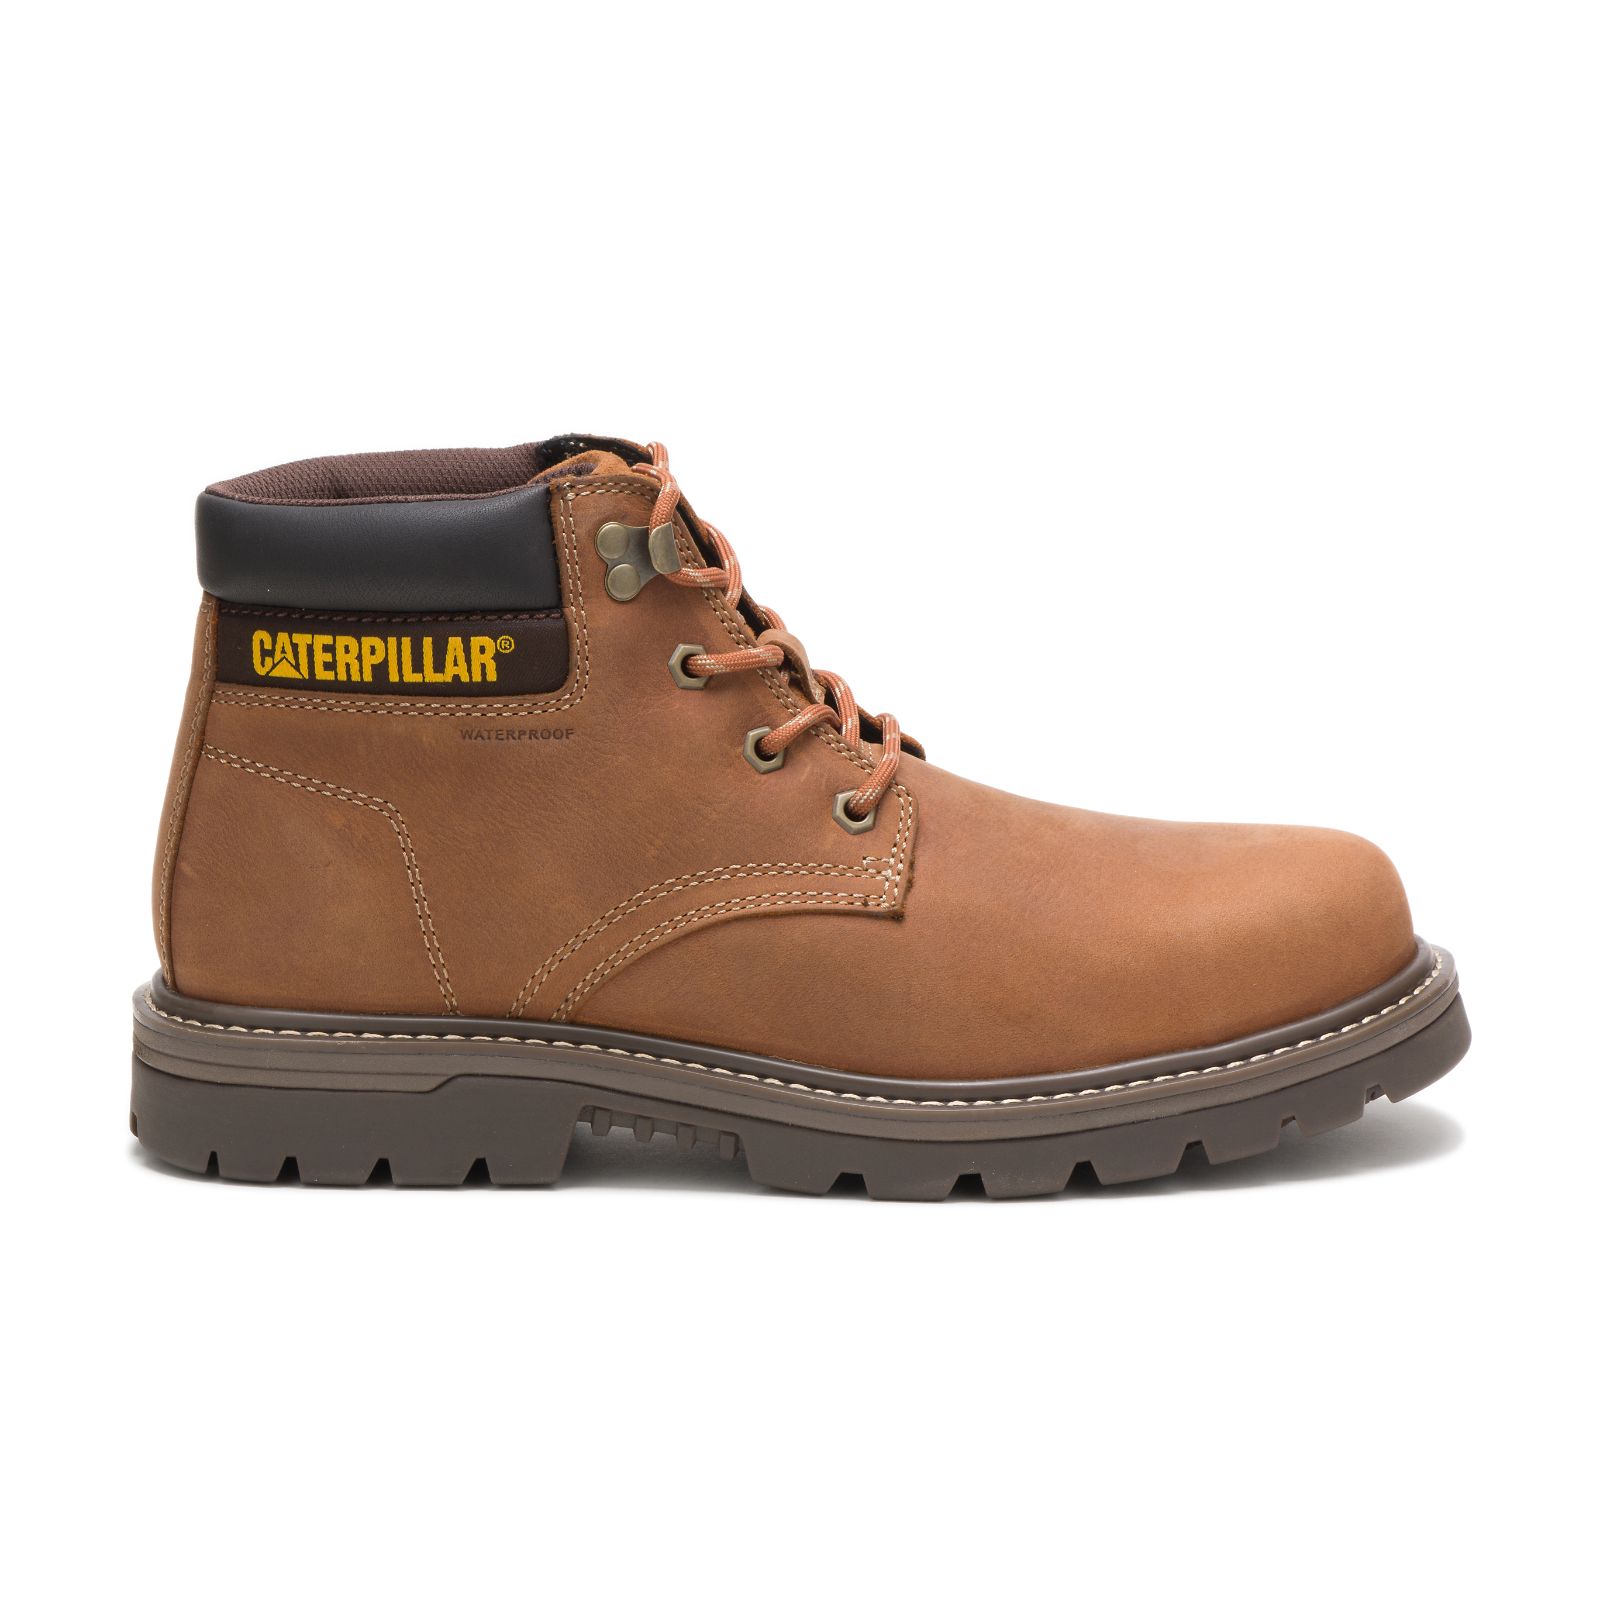 Caterpillar Outbase Waterproof Steel Toe Philippines - Mens Steel Toe Boots - Brown 32094MDGV